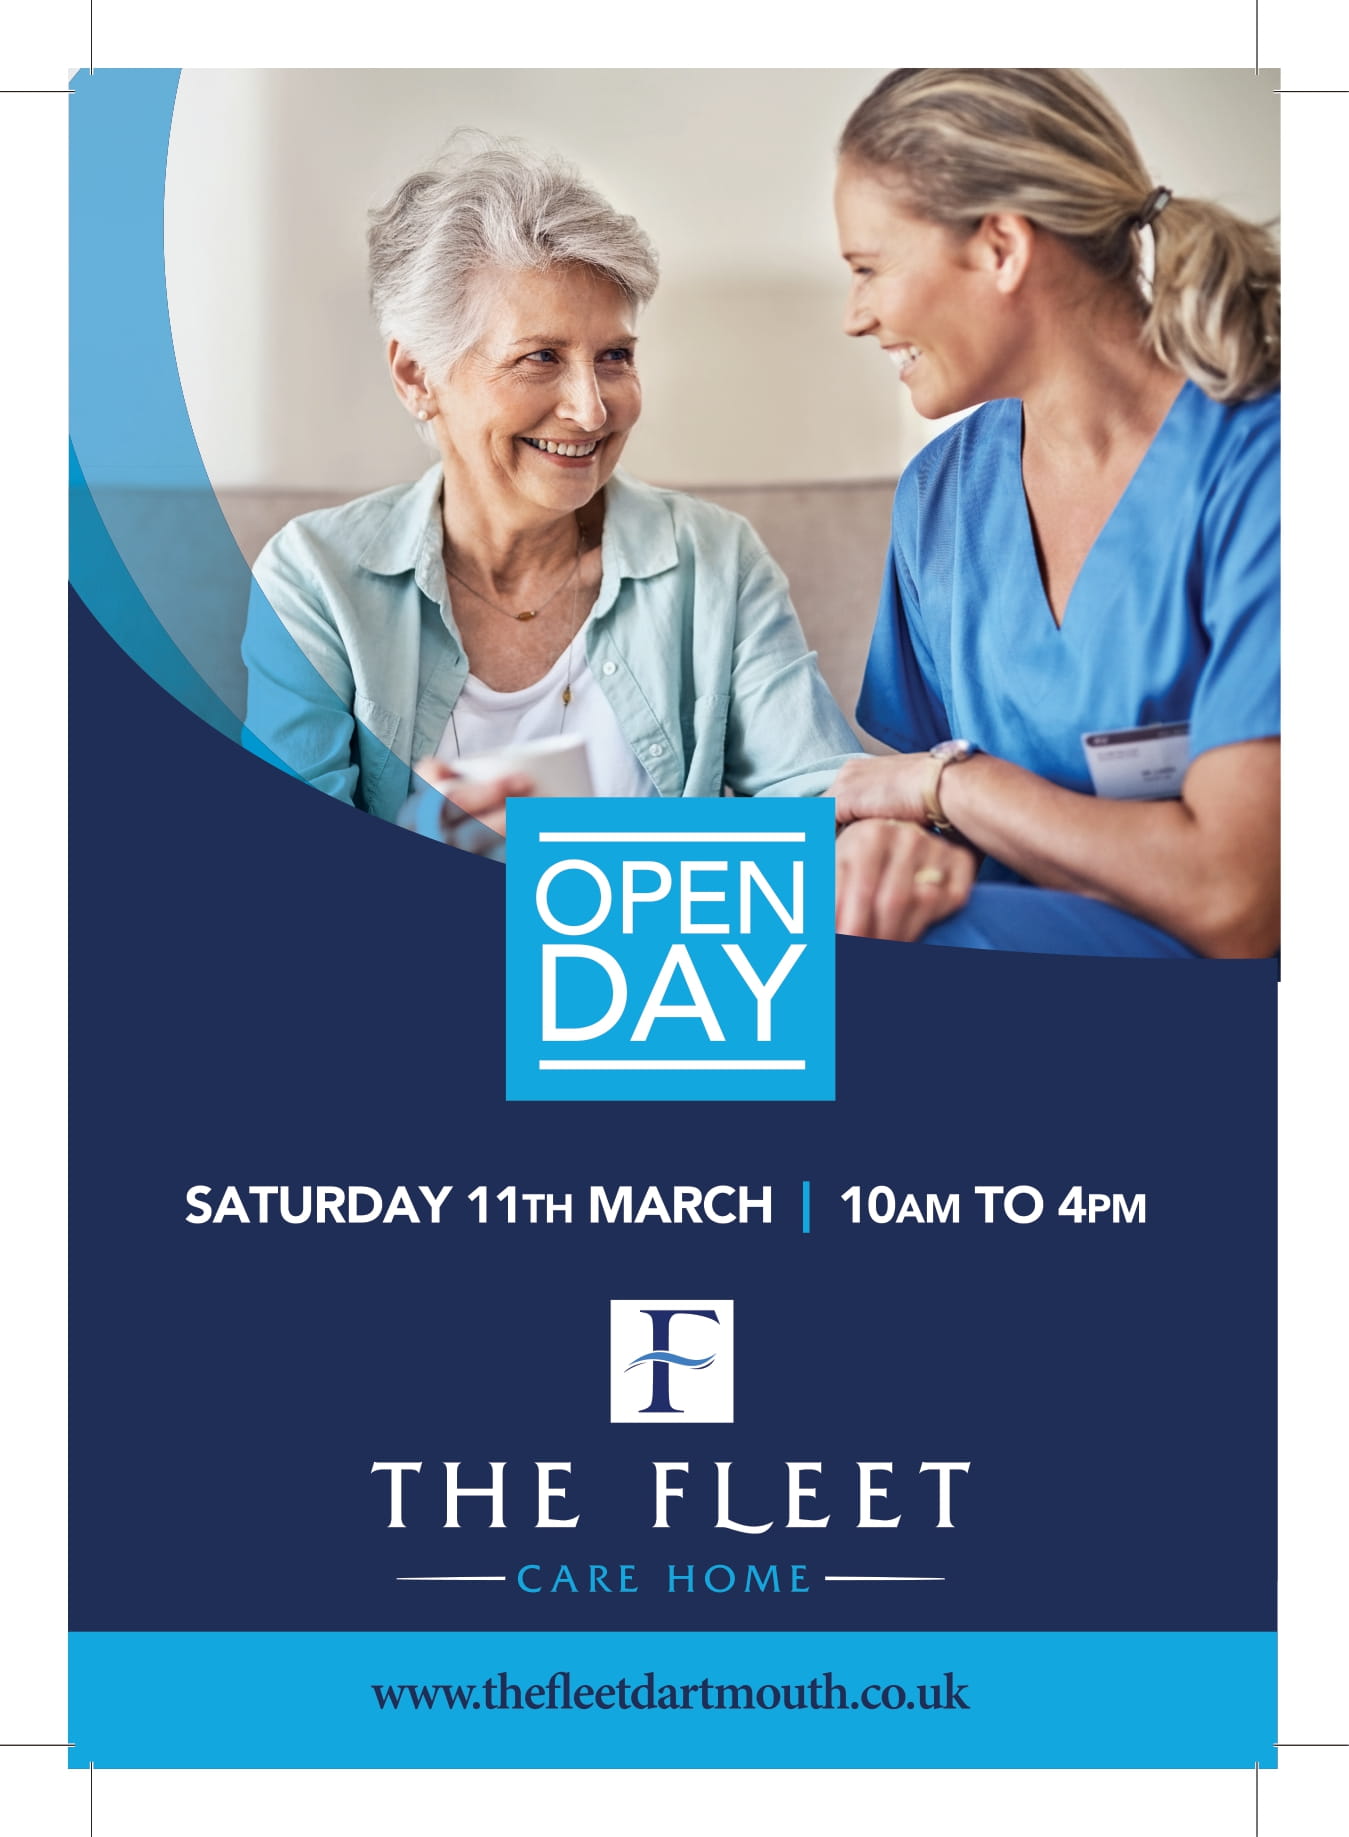 The Fleet Care Home's open day